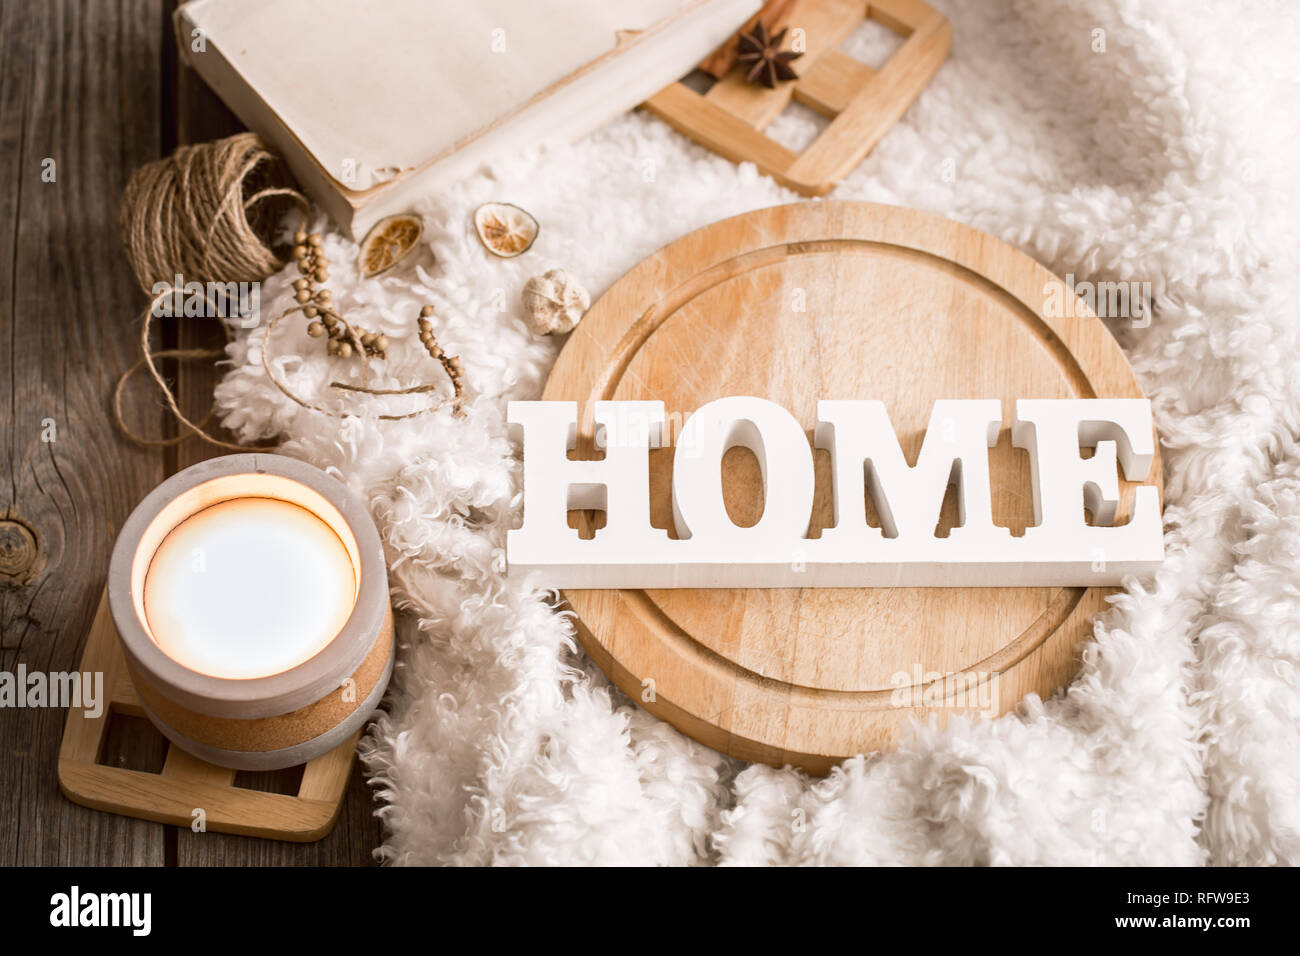 Cozy Home Decor Items With Wooden Letters Candle And Book On The Background Of Beautiful White Plaid Home Atmosphere Concept Stock Photo Alamy